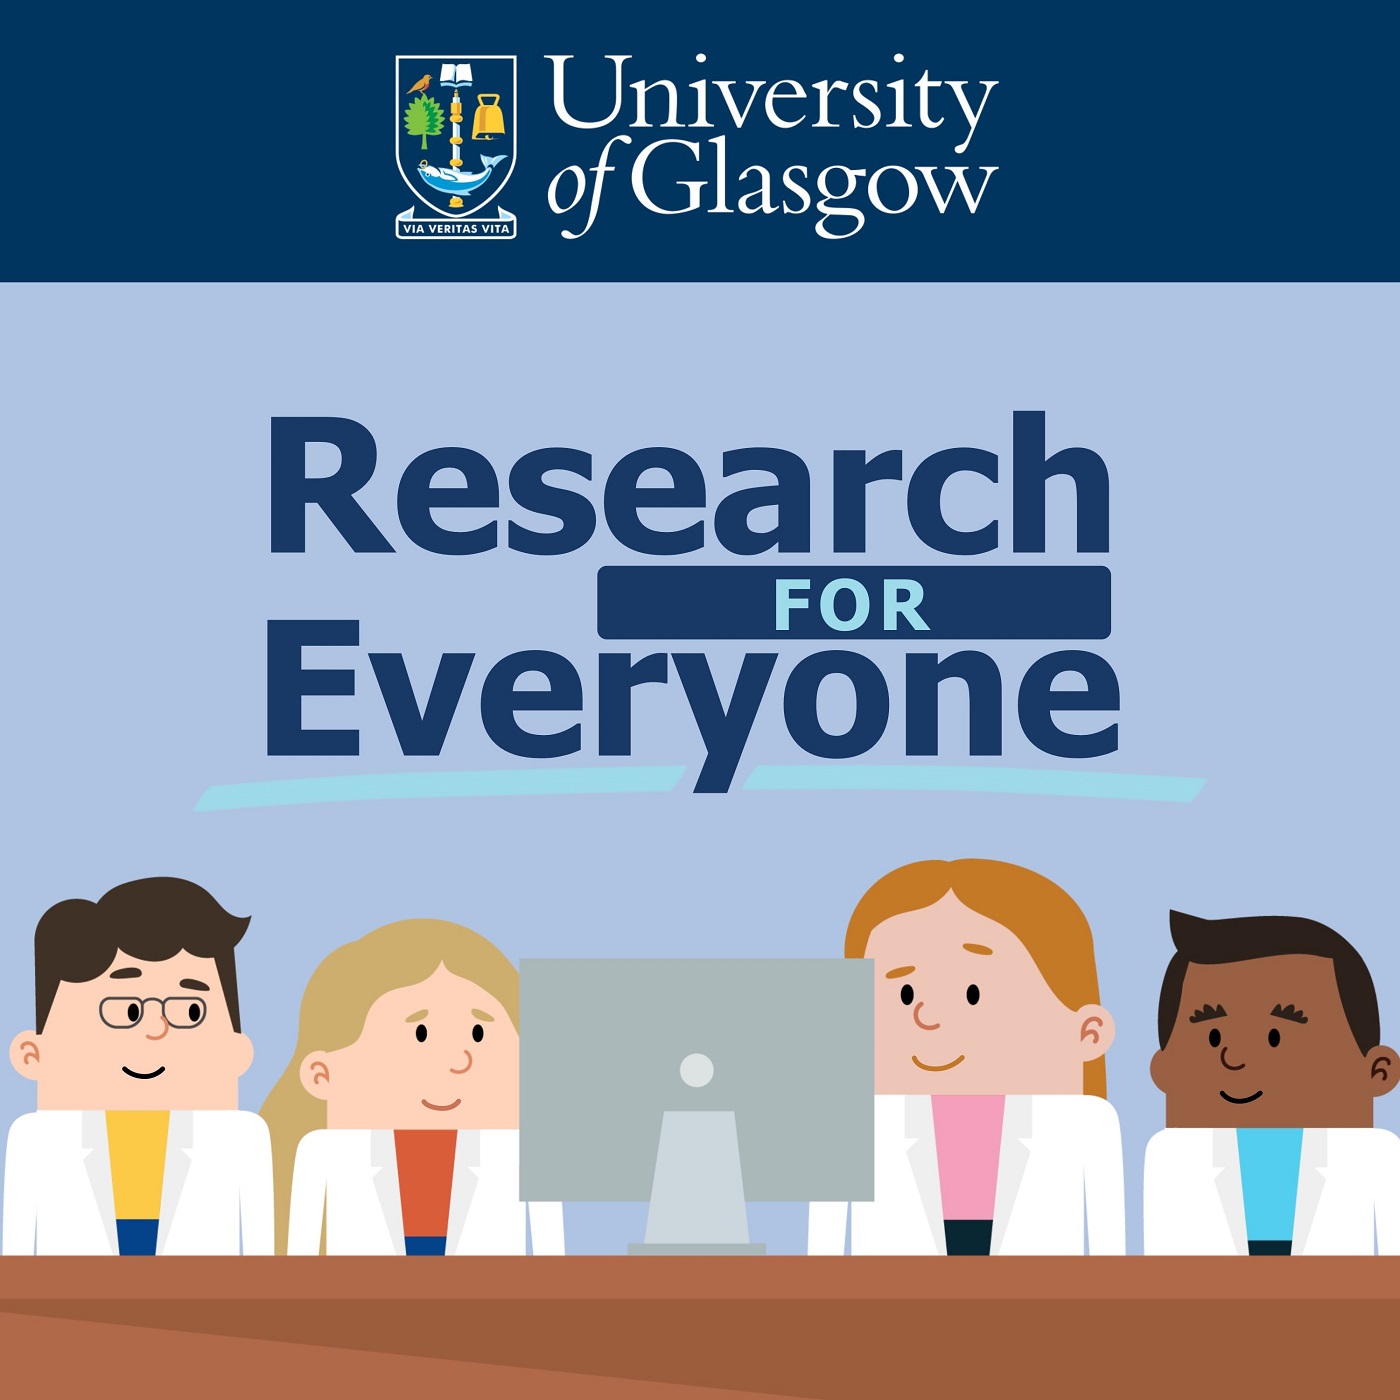 Research for all logo featuring cartoon scientists in a laboratory and the University of Glasgow marque